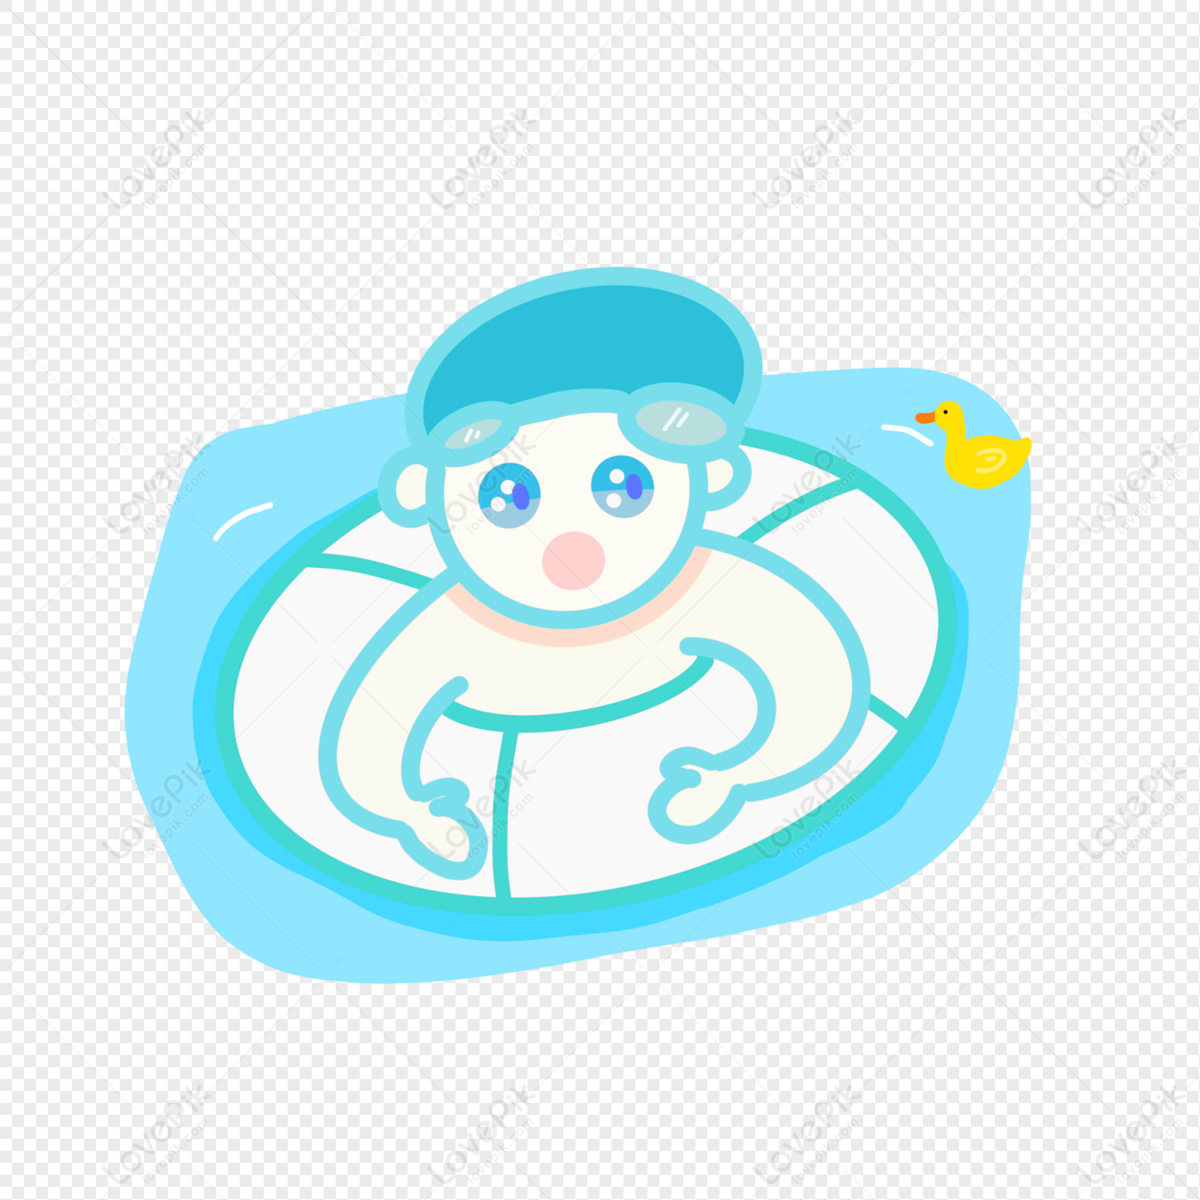 Swim PNG Transparent And Clipart Image For Free Download - Lovepik ...